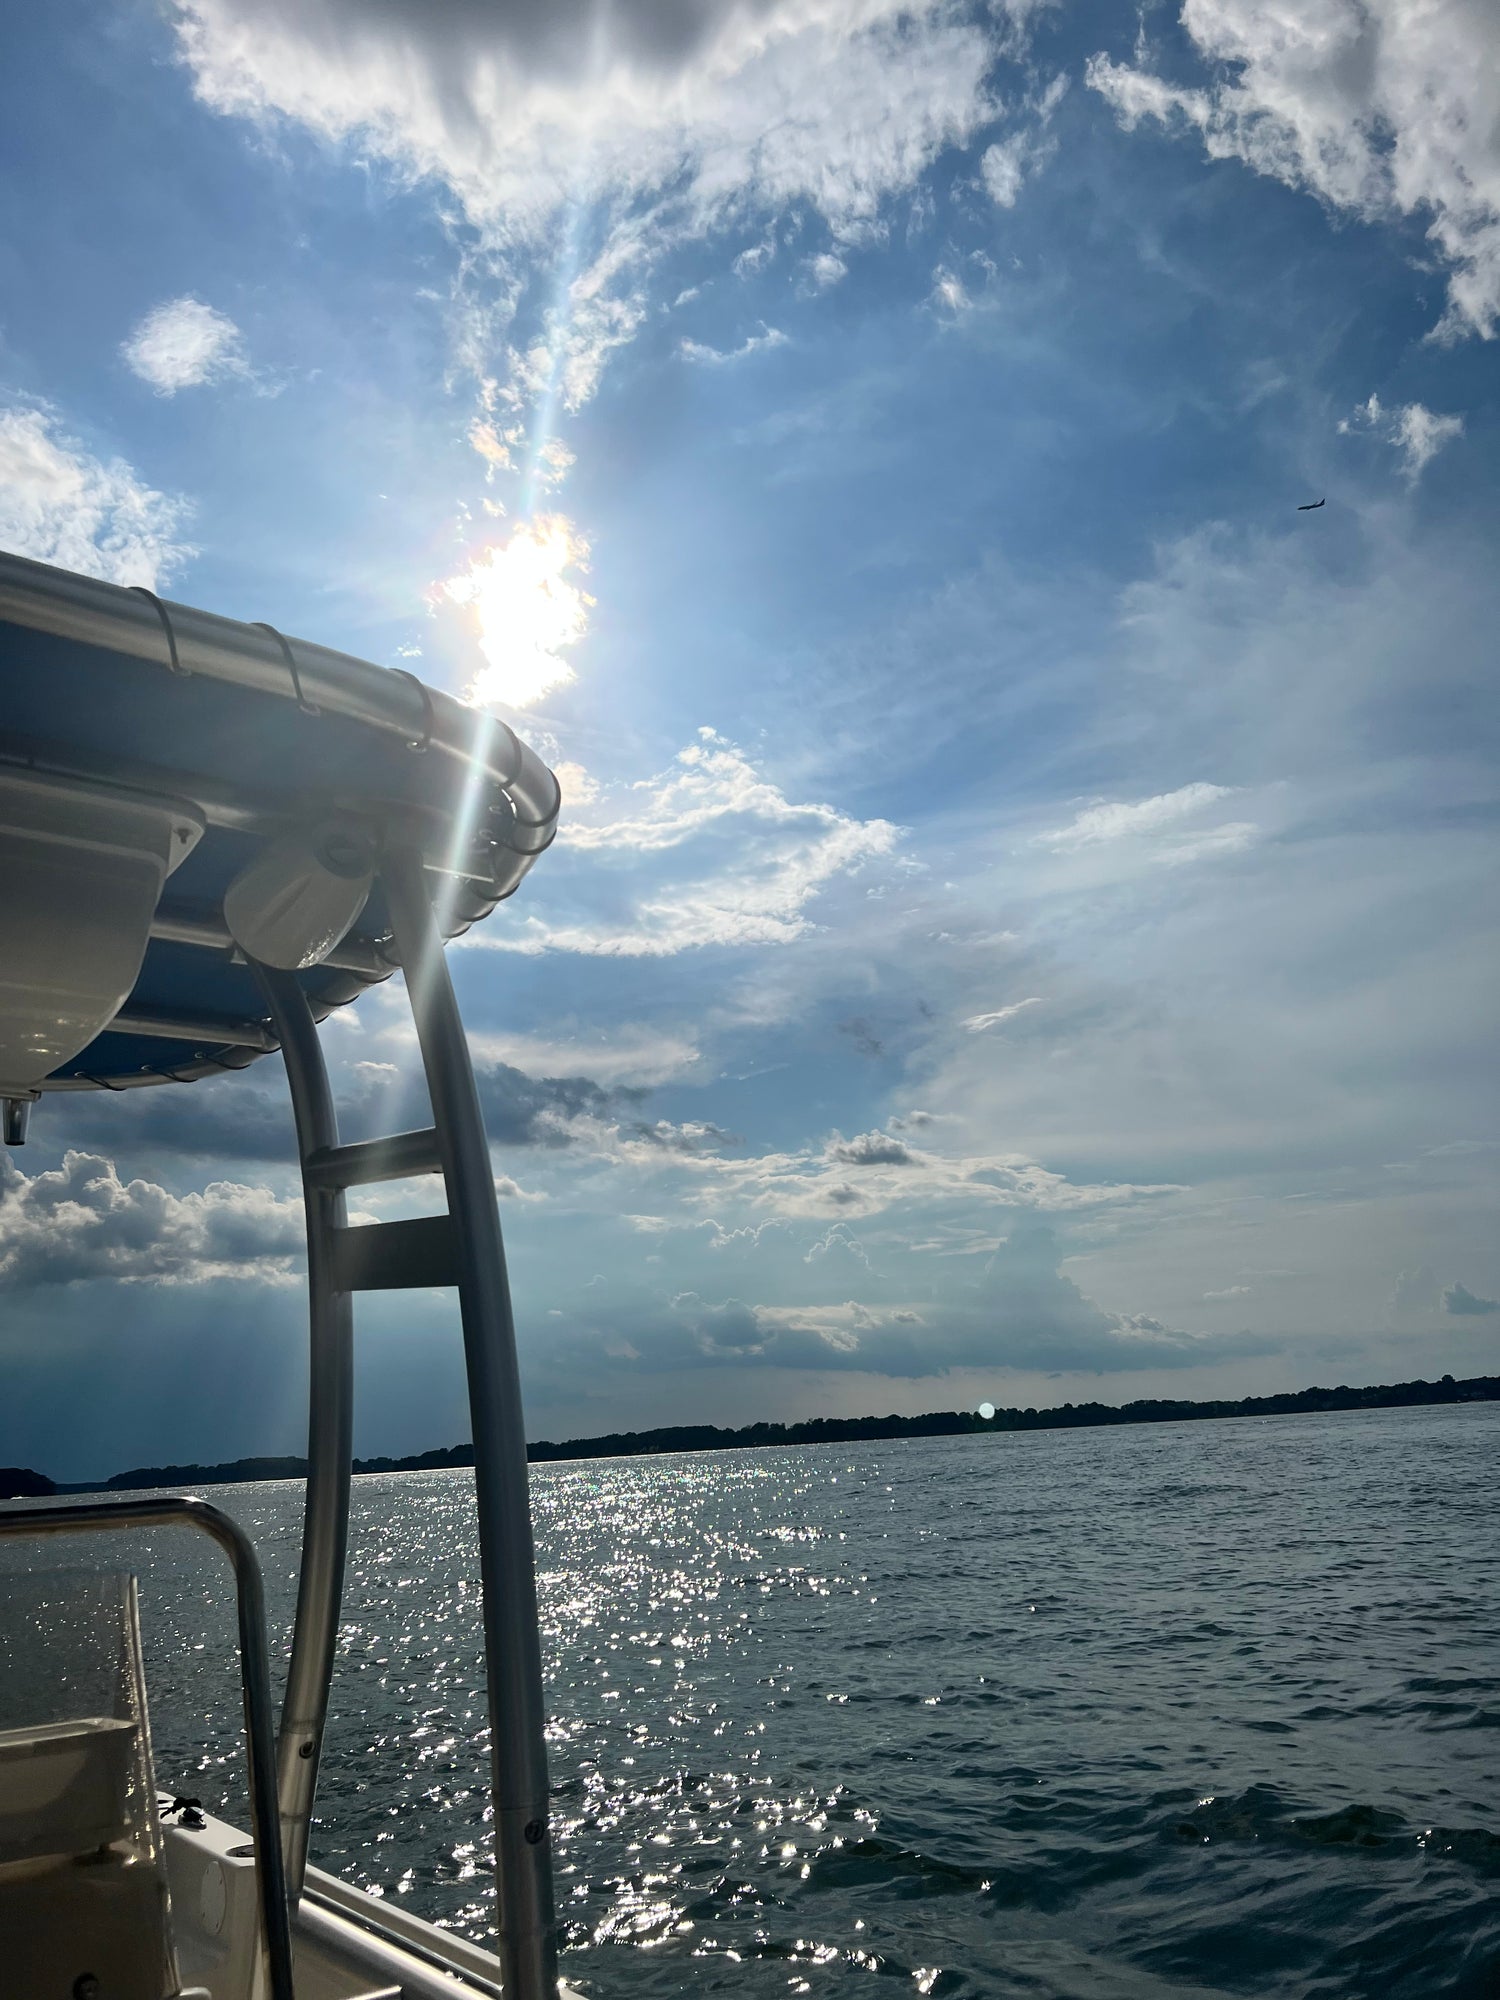 We offer Scout Center Console, Bennington Pontoons and Sea Ray boats. Getting you on the water is what we do best. If you're a Real Estate agent looking to show your clients waterfront property, look no further. CharterLKN has you covered!